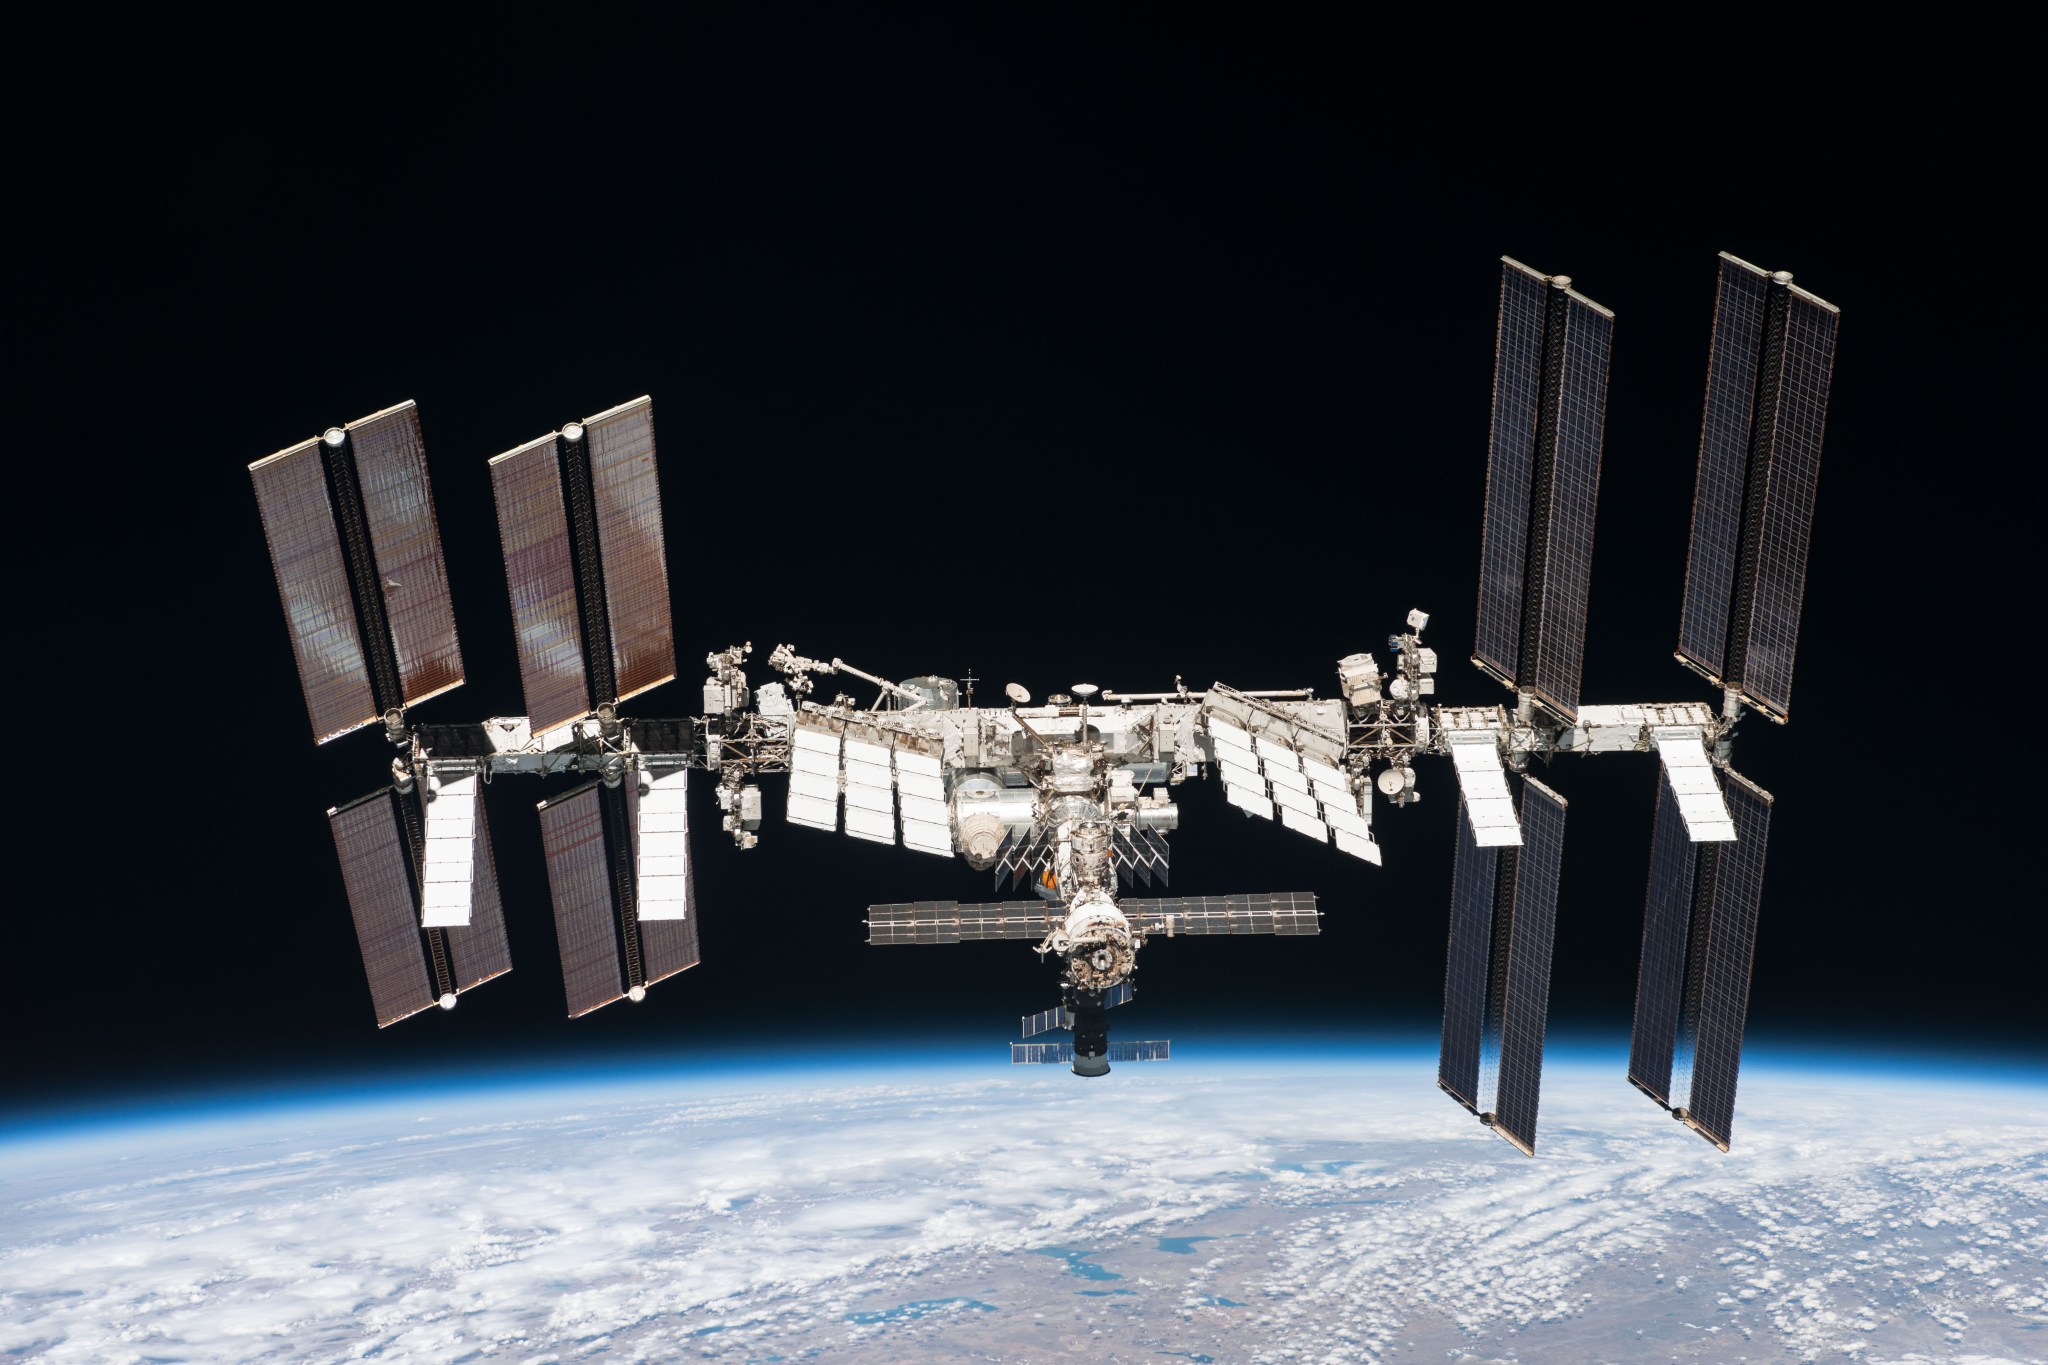 A photograph from space of the International Space Station orbiting Earth. The station is a graceful horizontal cylinder with four rectangular solar panels oriented vertically, two on either side of center. In the center are horizontal square panels angled slightly to the right, and science instruments and modules extend out from the center cylinder.